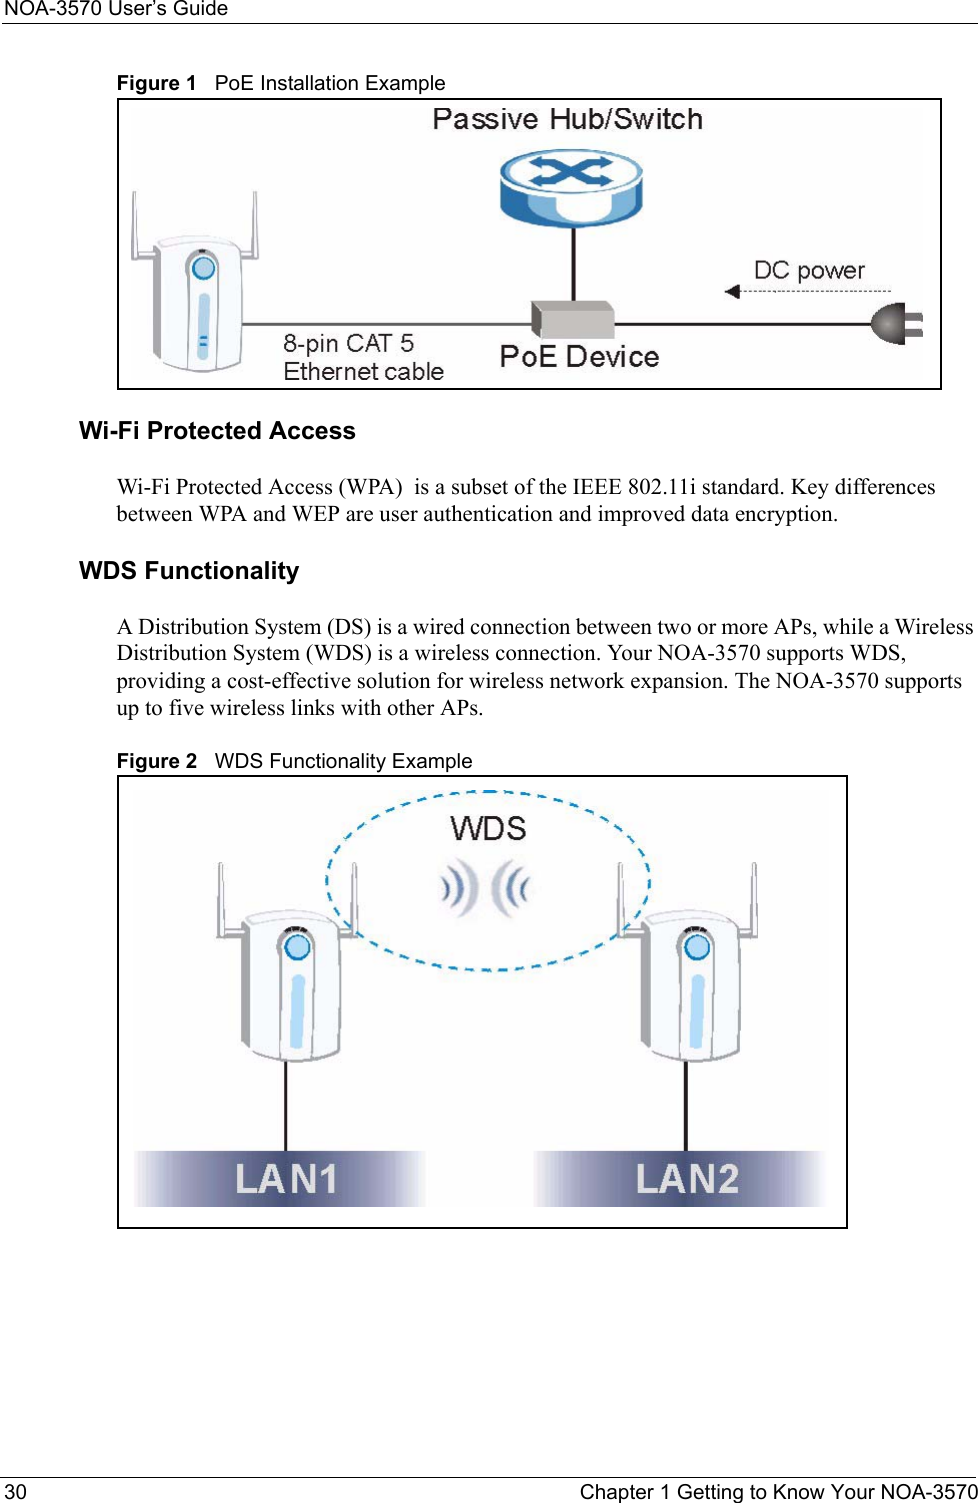 NOA-3570 User’s Guide30 Chapter 1 Getting to Know Your NOA-3570Figure 1   PoE Installation ExampleWi-Fi Protected AccessWi-Fi Protected Access (WPA)  is a subset of the IEEE 802.11i standard. Key differences between WPA and WEP are user authentication and improved data encryption.WDS FunctionalityA Distribution System (DS) is a wired connection between two or more APs, while a Wireless Distribution System (WDS) is a wireless connection. Your NOA-3570 supports WDS, providing a cost-effective solution for wireless network expansion. The NOA-3570 supports up to five wireless links with other APs.Figure 2   WDS Functionality Example